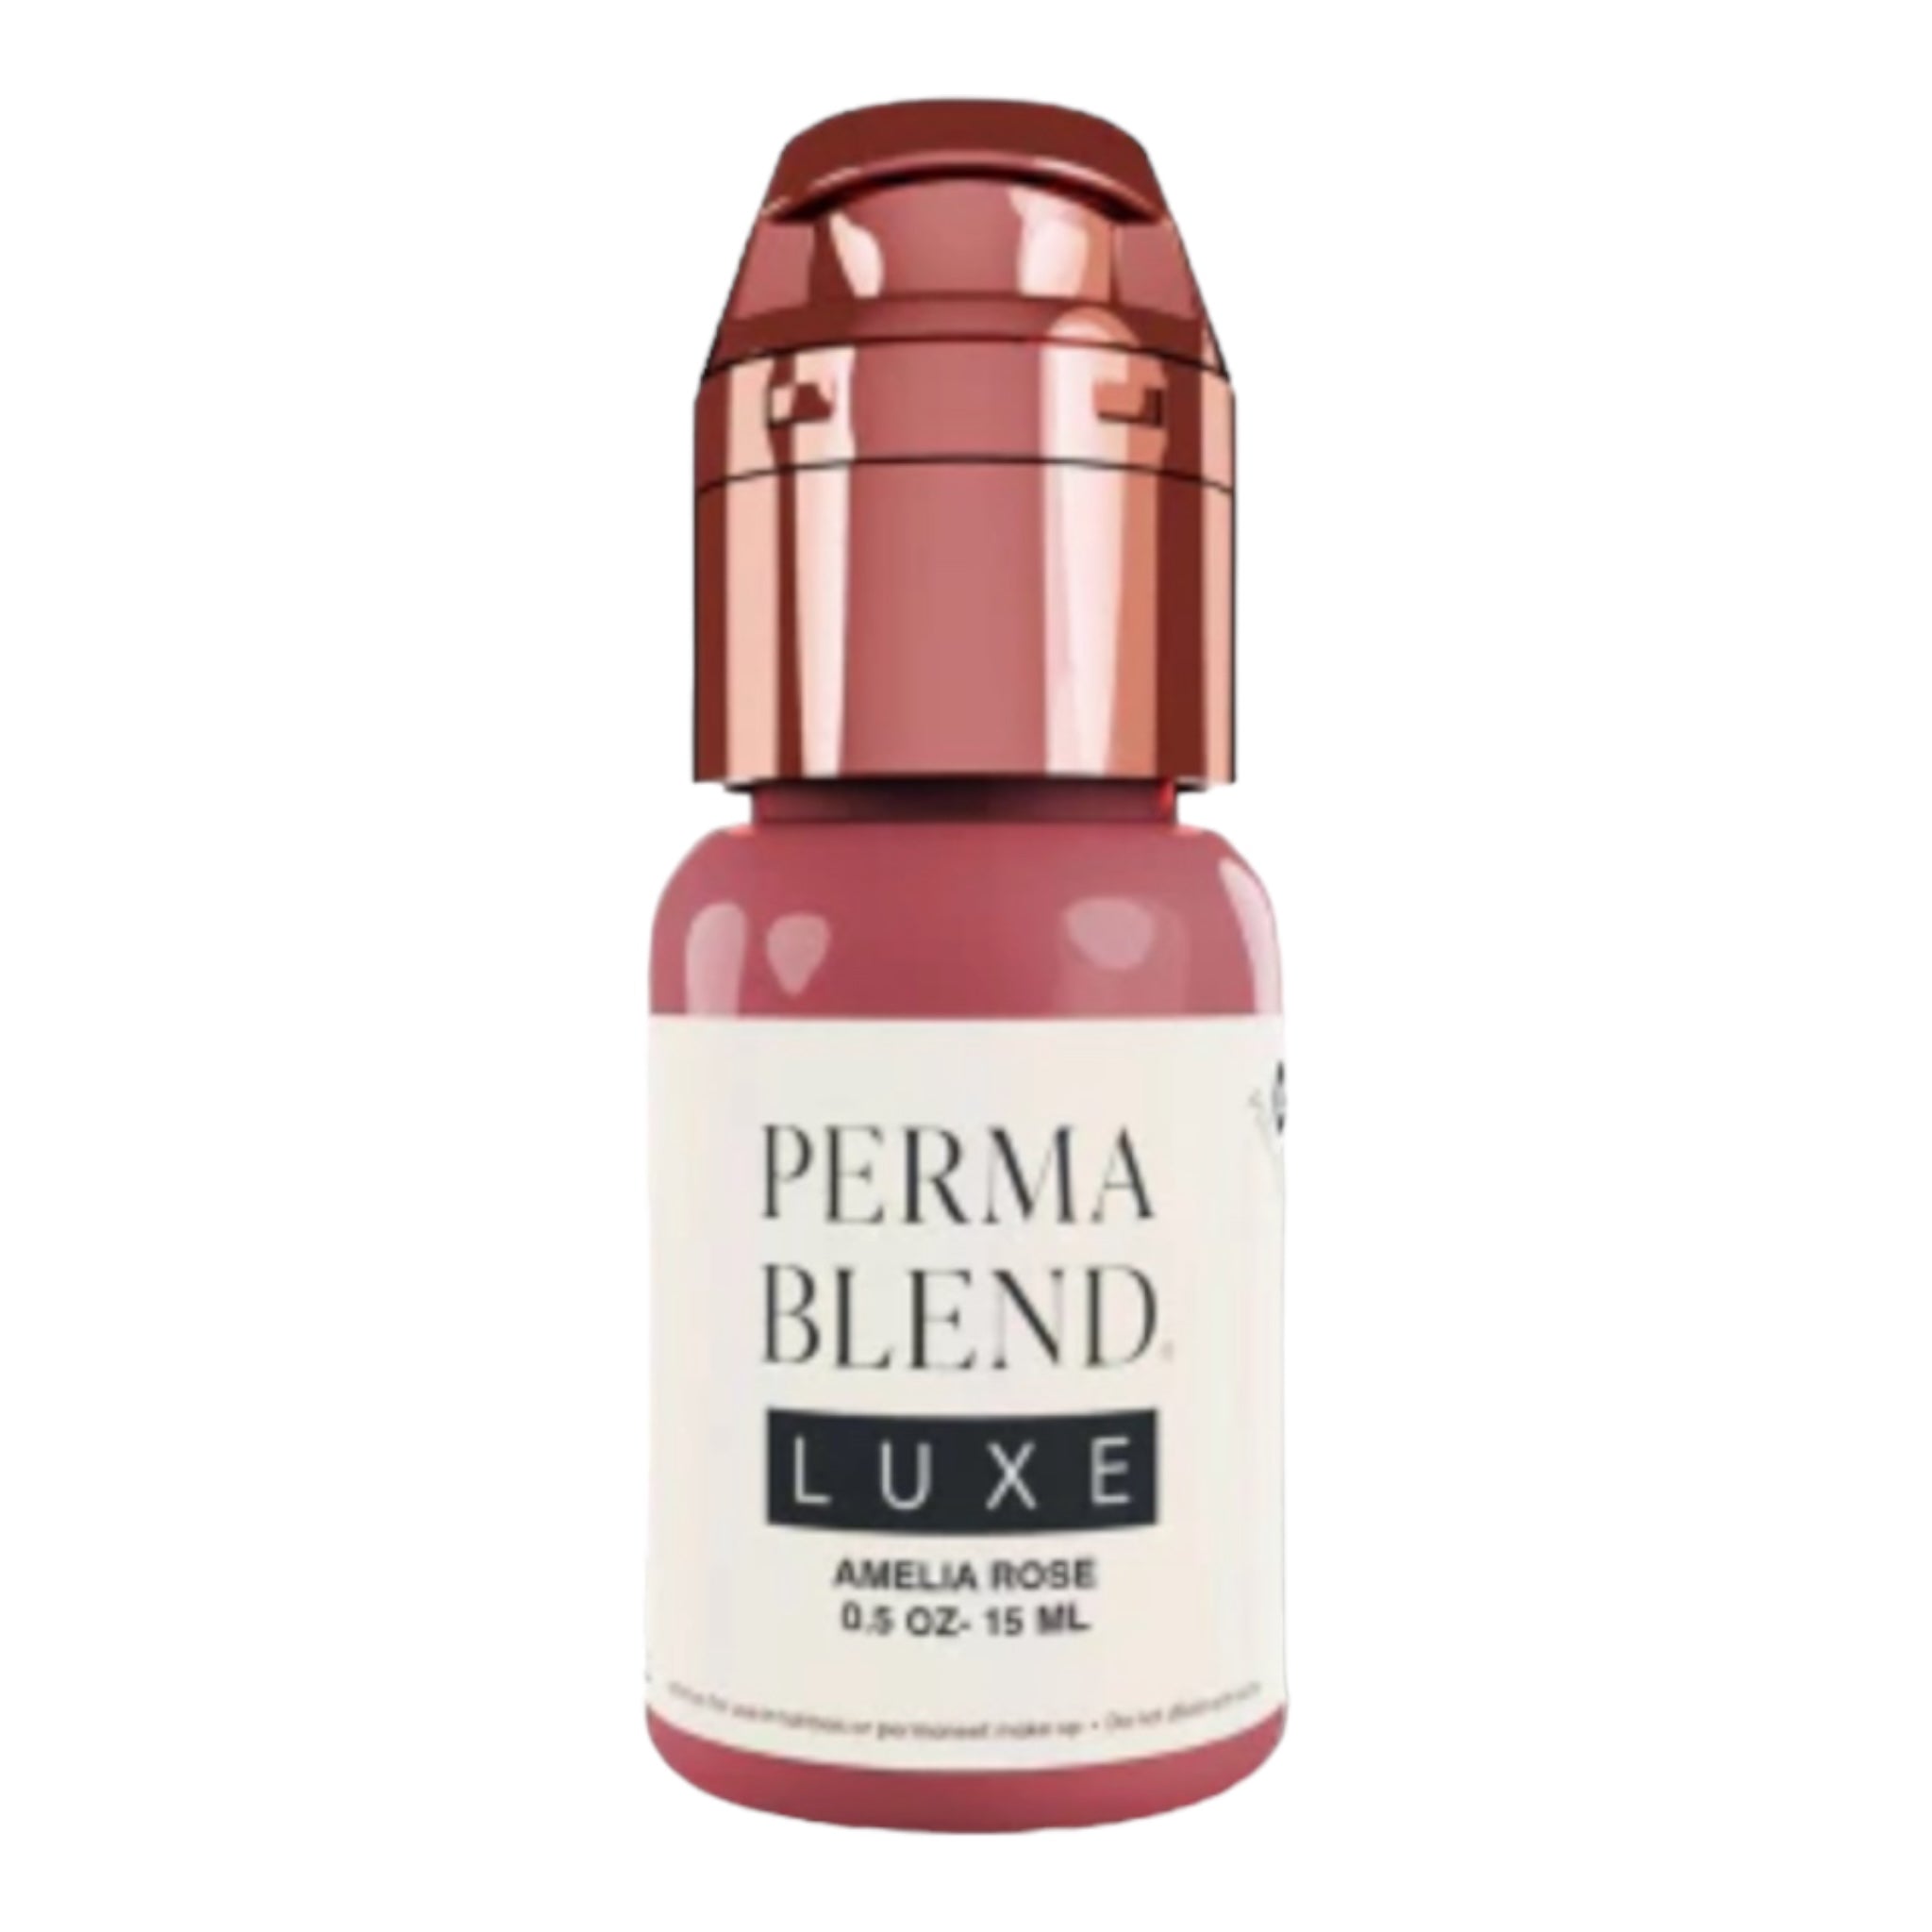 Encre Maquillage Perma Blend Luxe 15ml - Amelia Rose